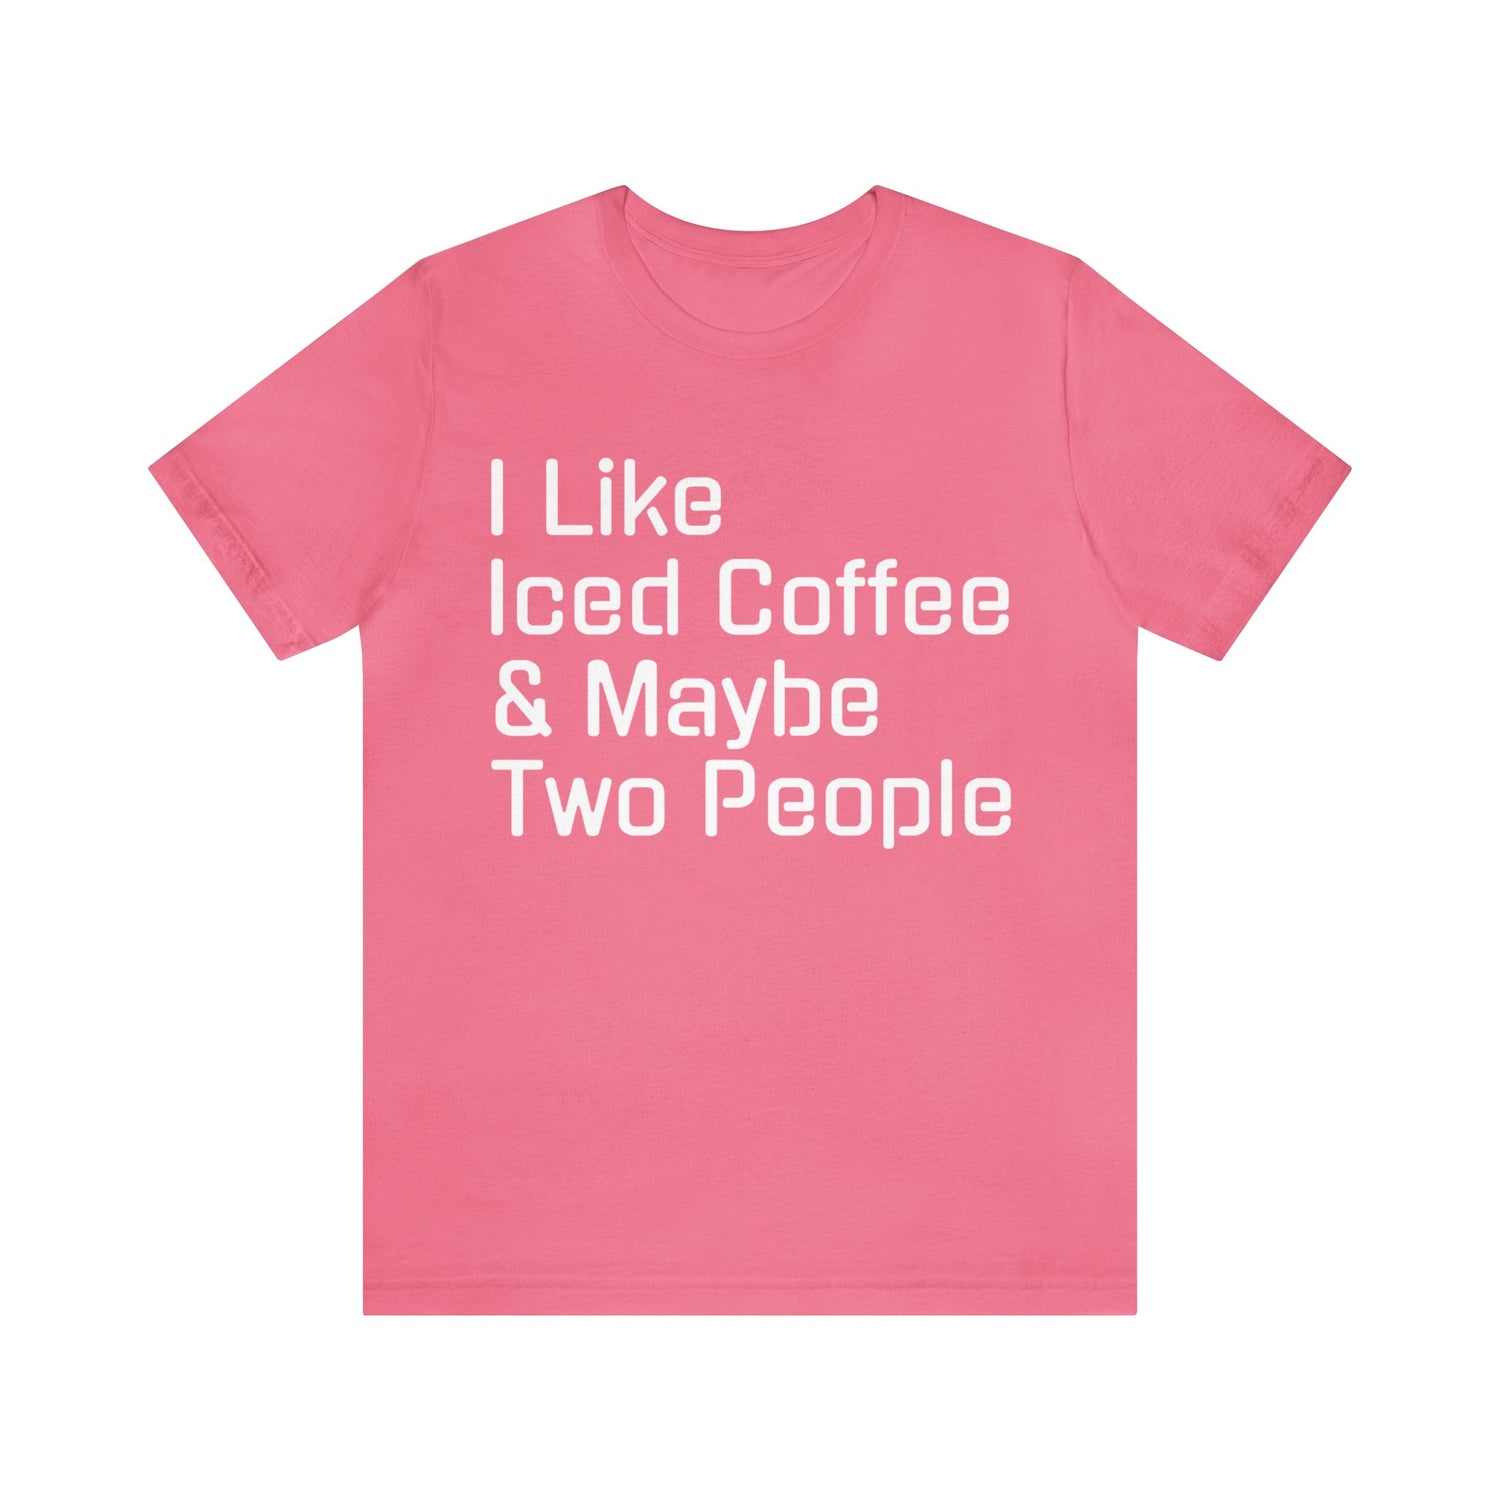 Iced Coffee Enthusiast Gift Ideas | Iced Coffee T-Shirt Charity Pink T-Shirt Petrova Designs